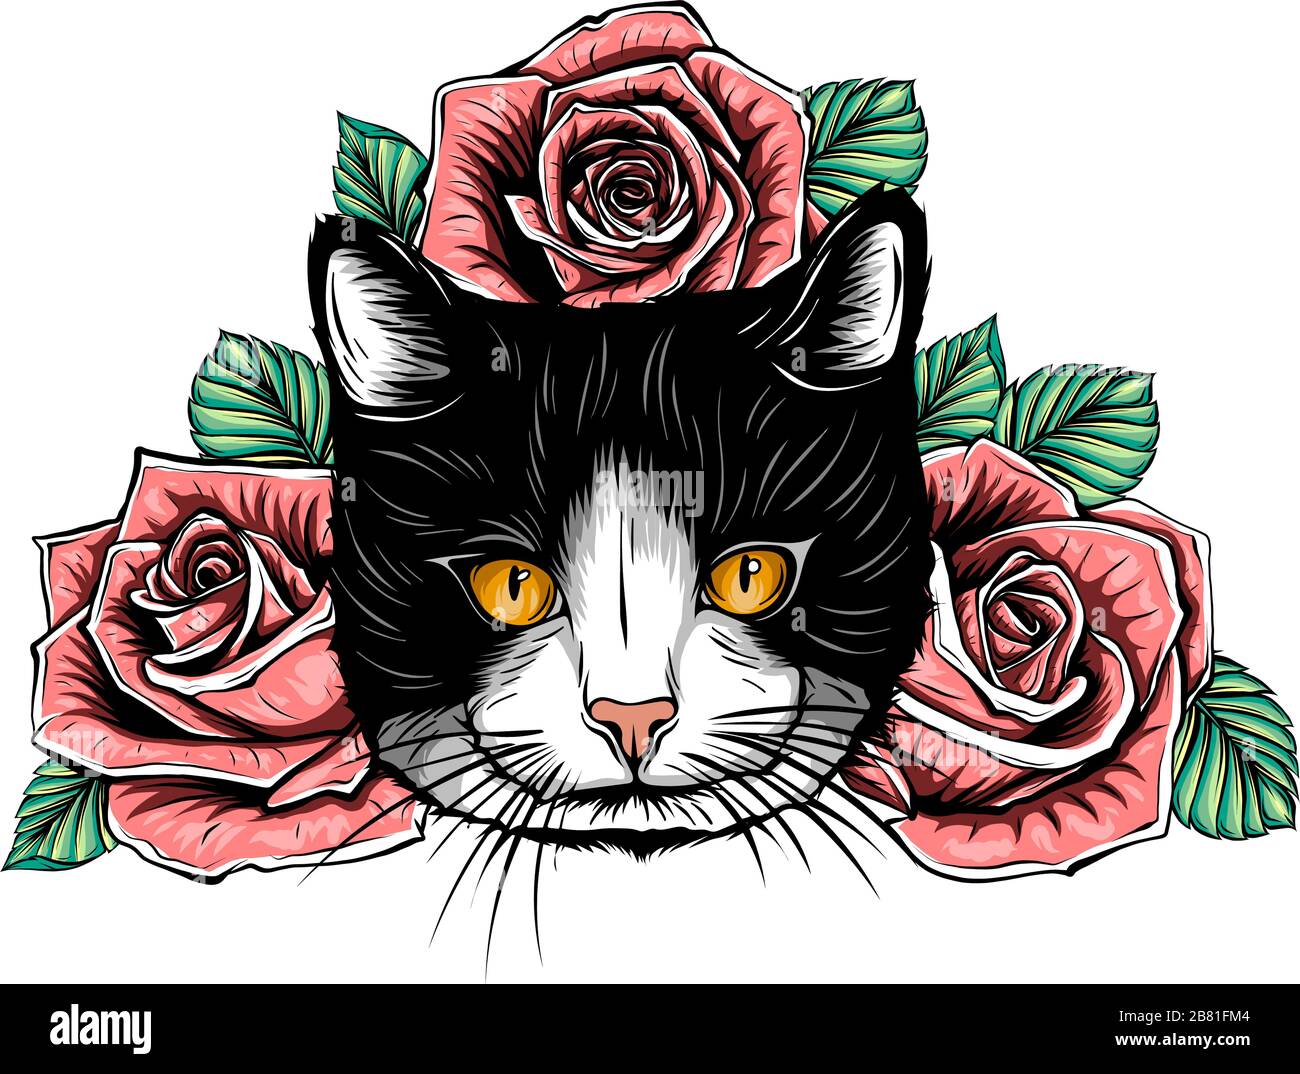 cartoon fluffy cat with roses. Siamese cat with open eyes and flowers. Stock Vector